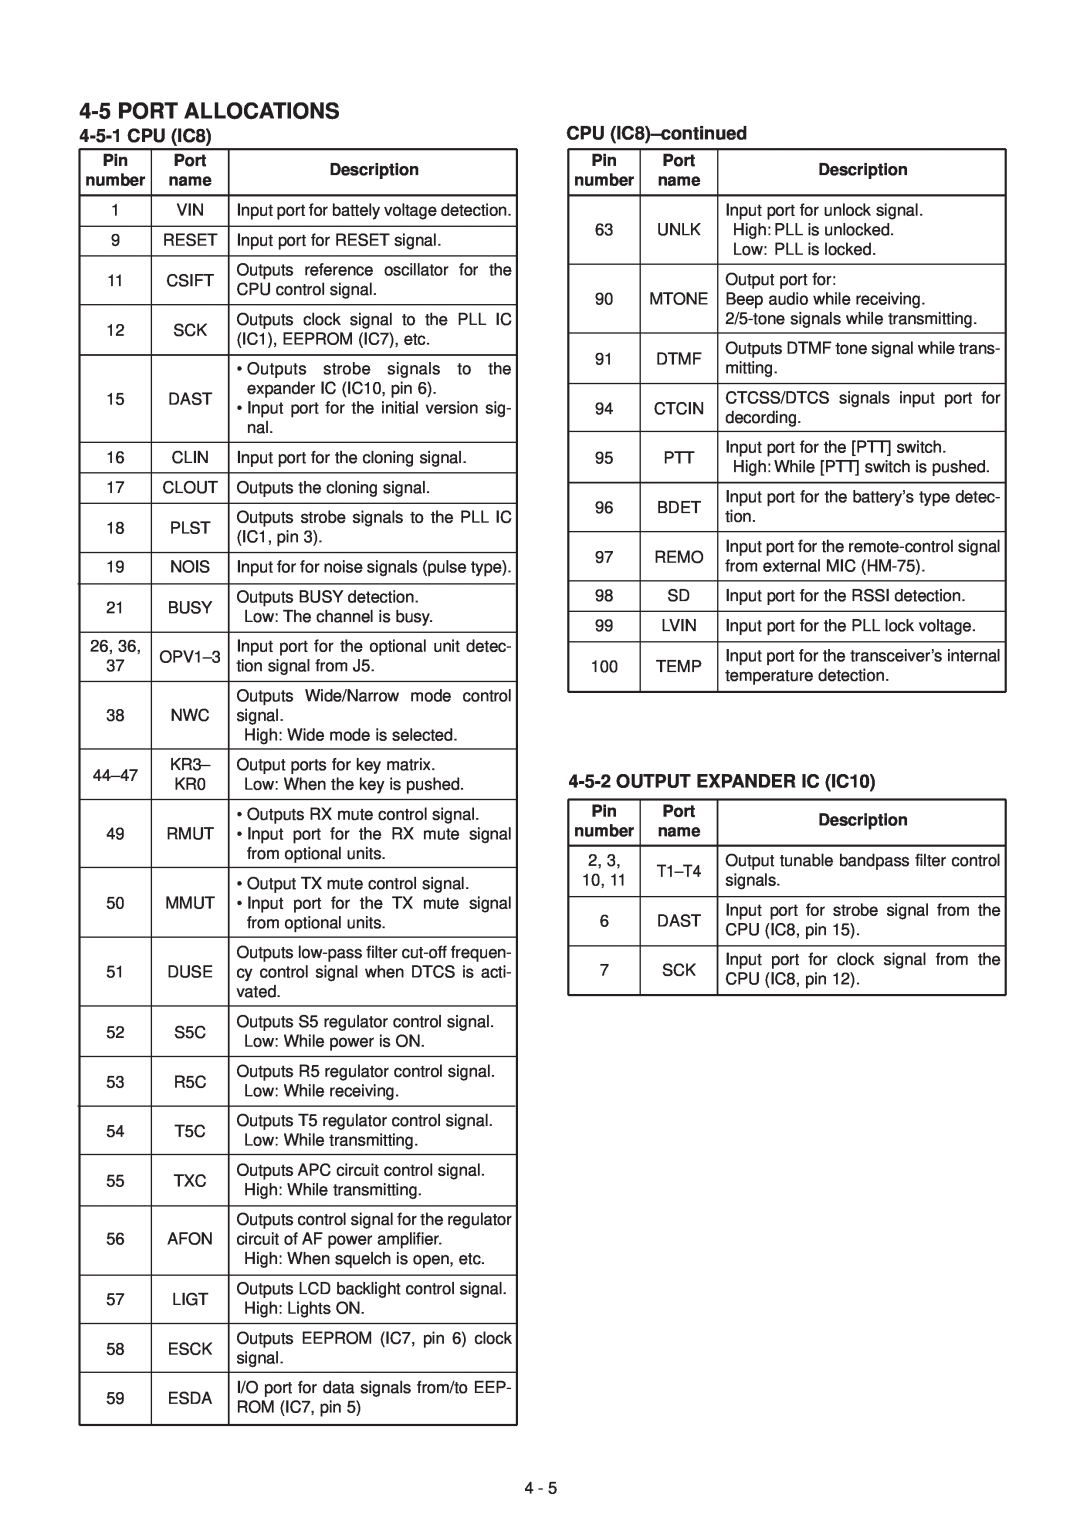 Icom IC-F3GT, IC-F3GS service manual Port Allocations, CPU IC8-continued, OUTPUT EXPANDER IC IC10, Description, number 